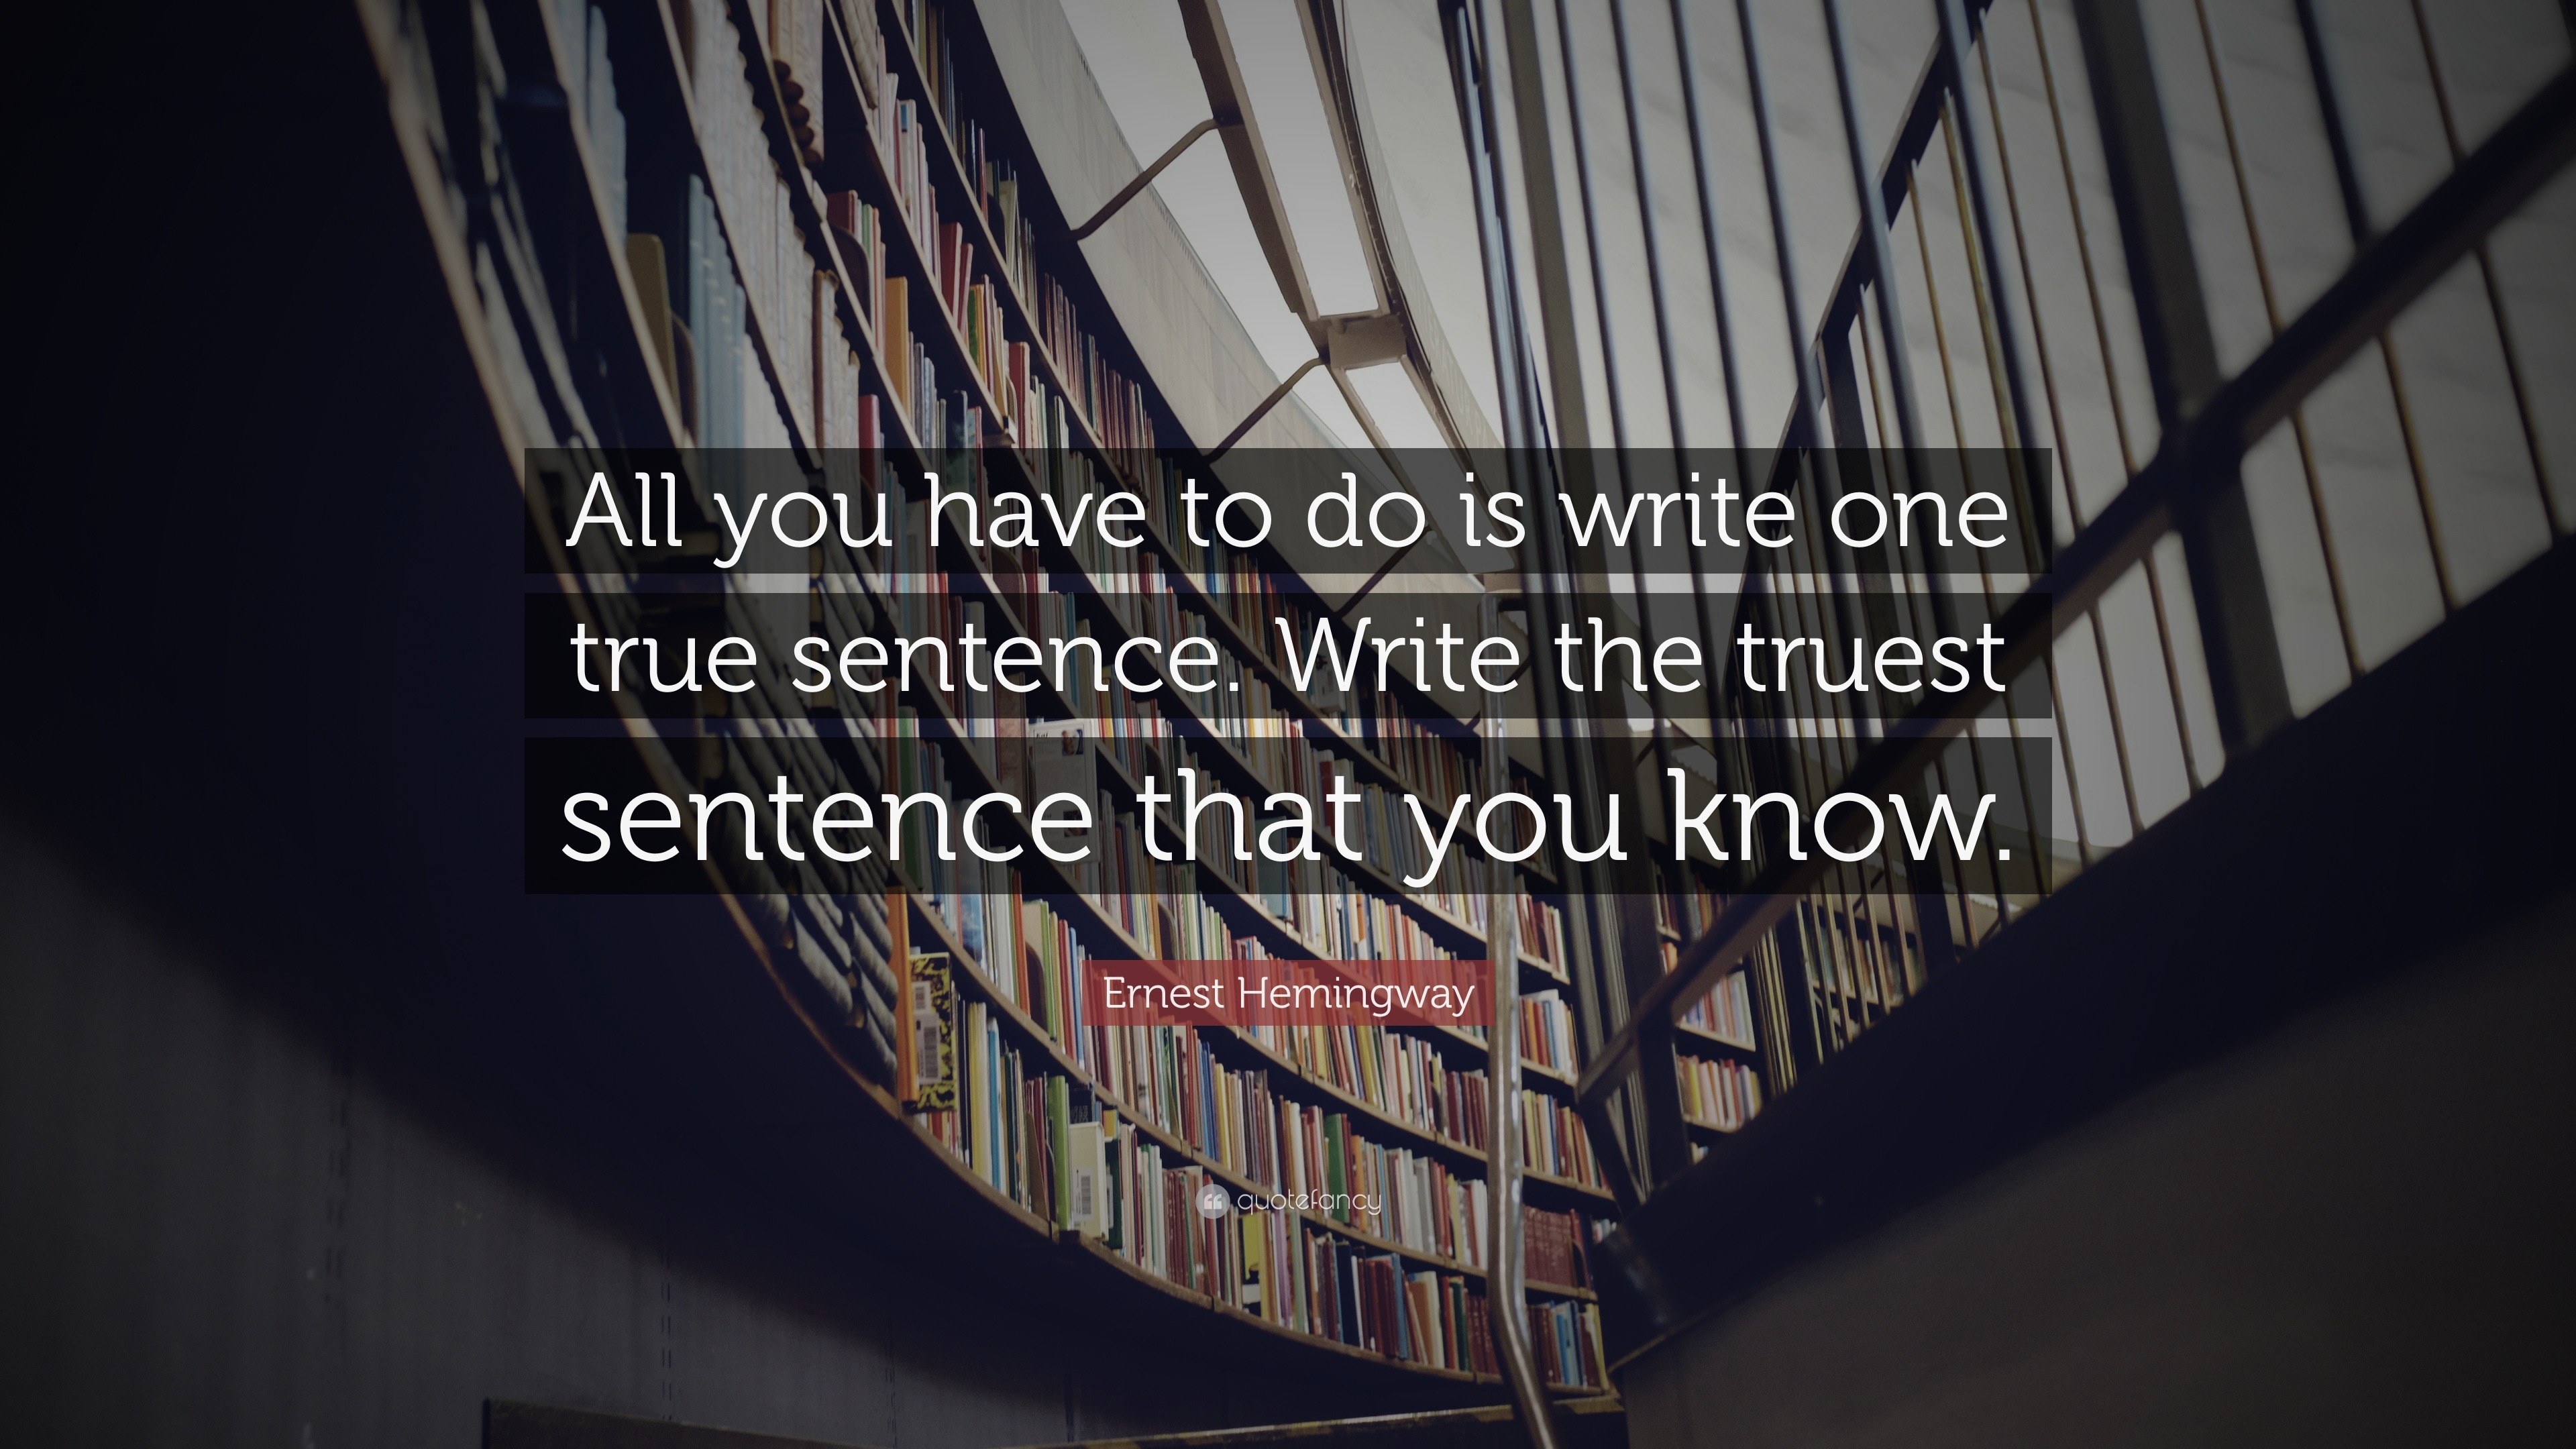 How to write for the trues